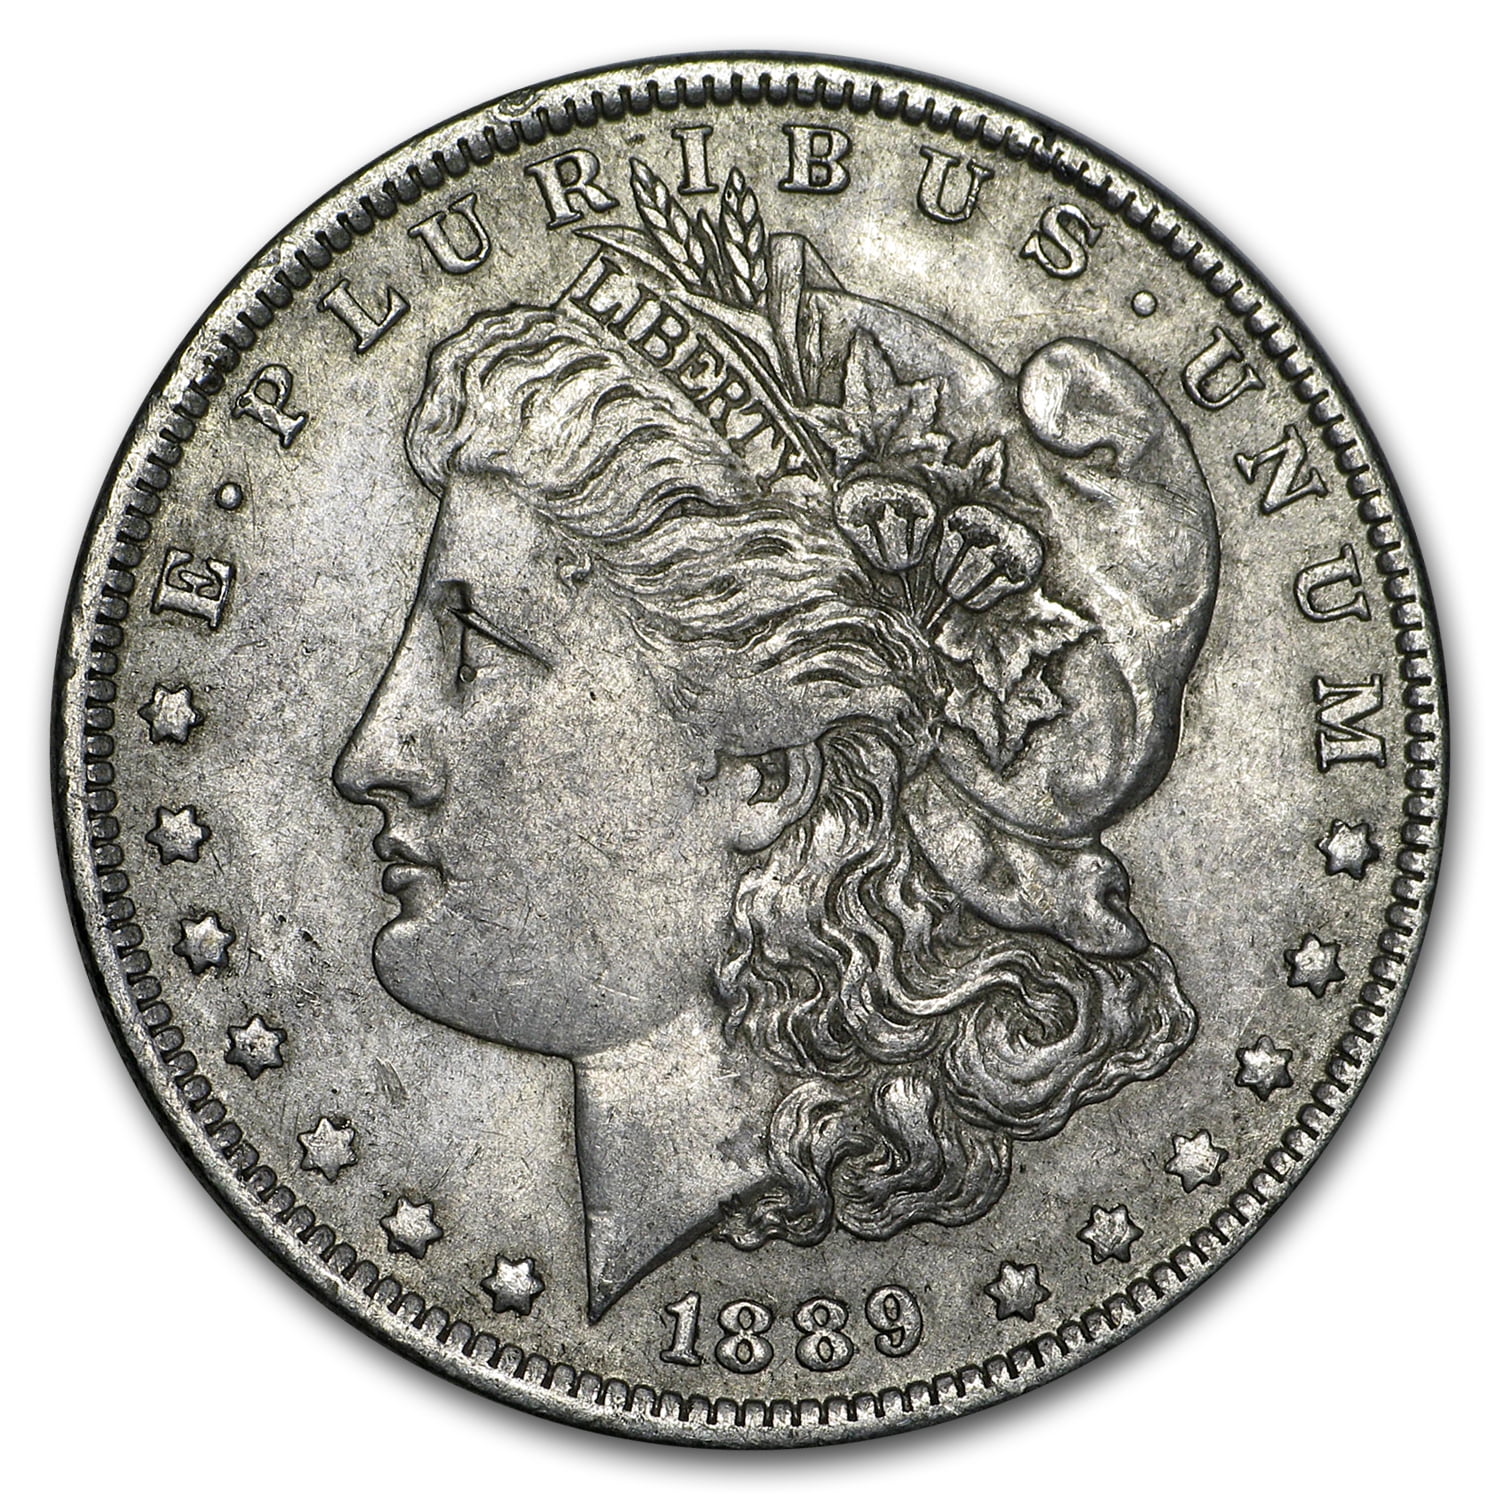 Rare dollar coin sells for $10,400 online - the key date and 'XF